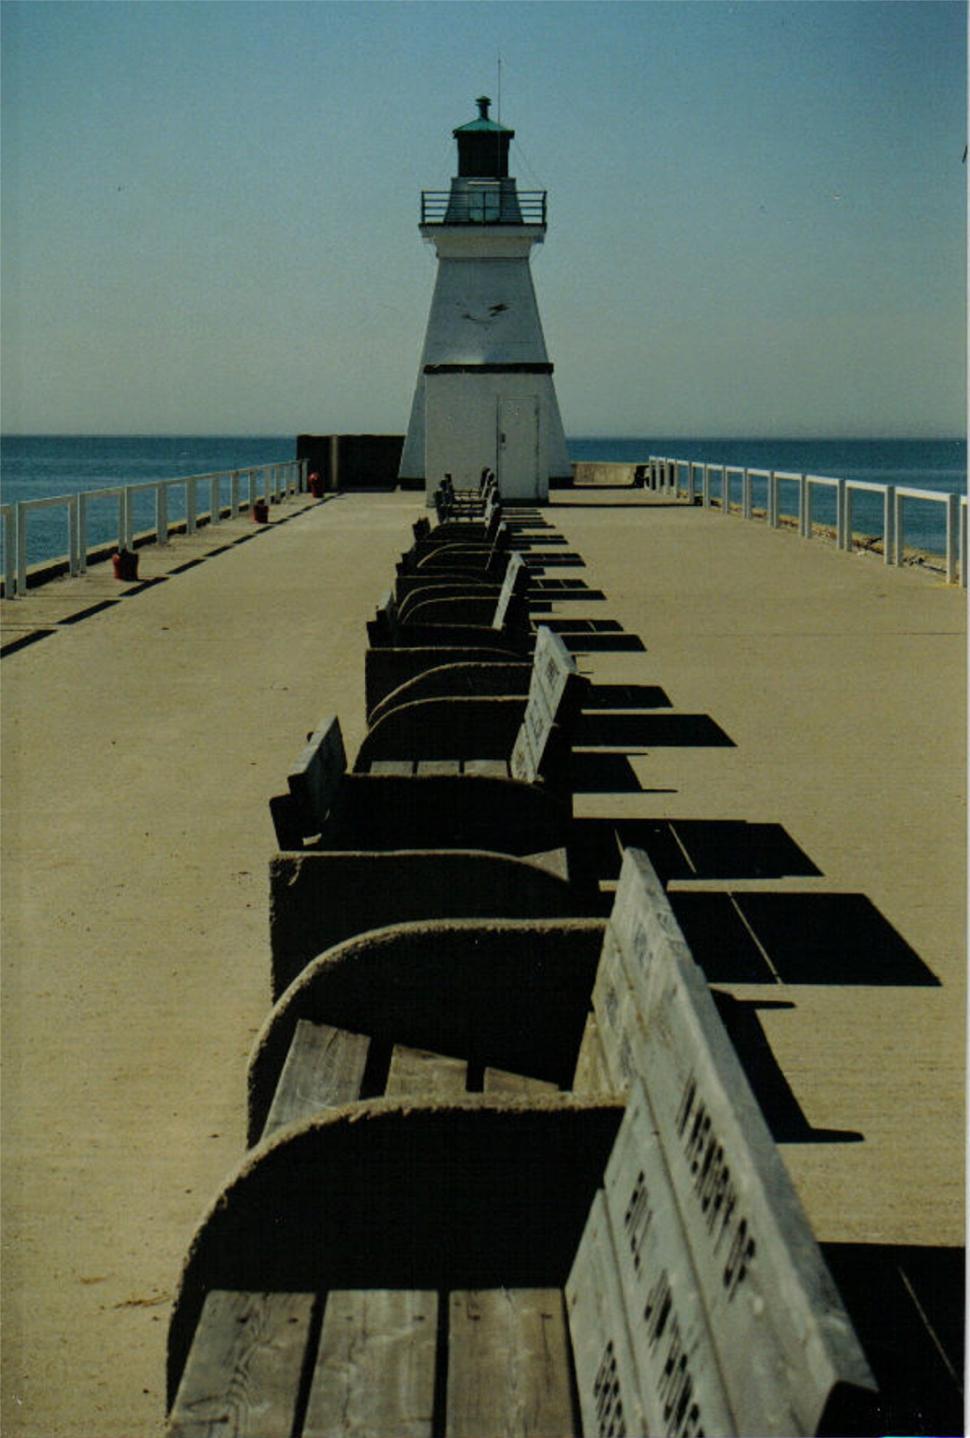 Free Image of Light House on Pier by Ocean 